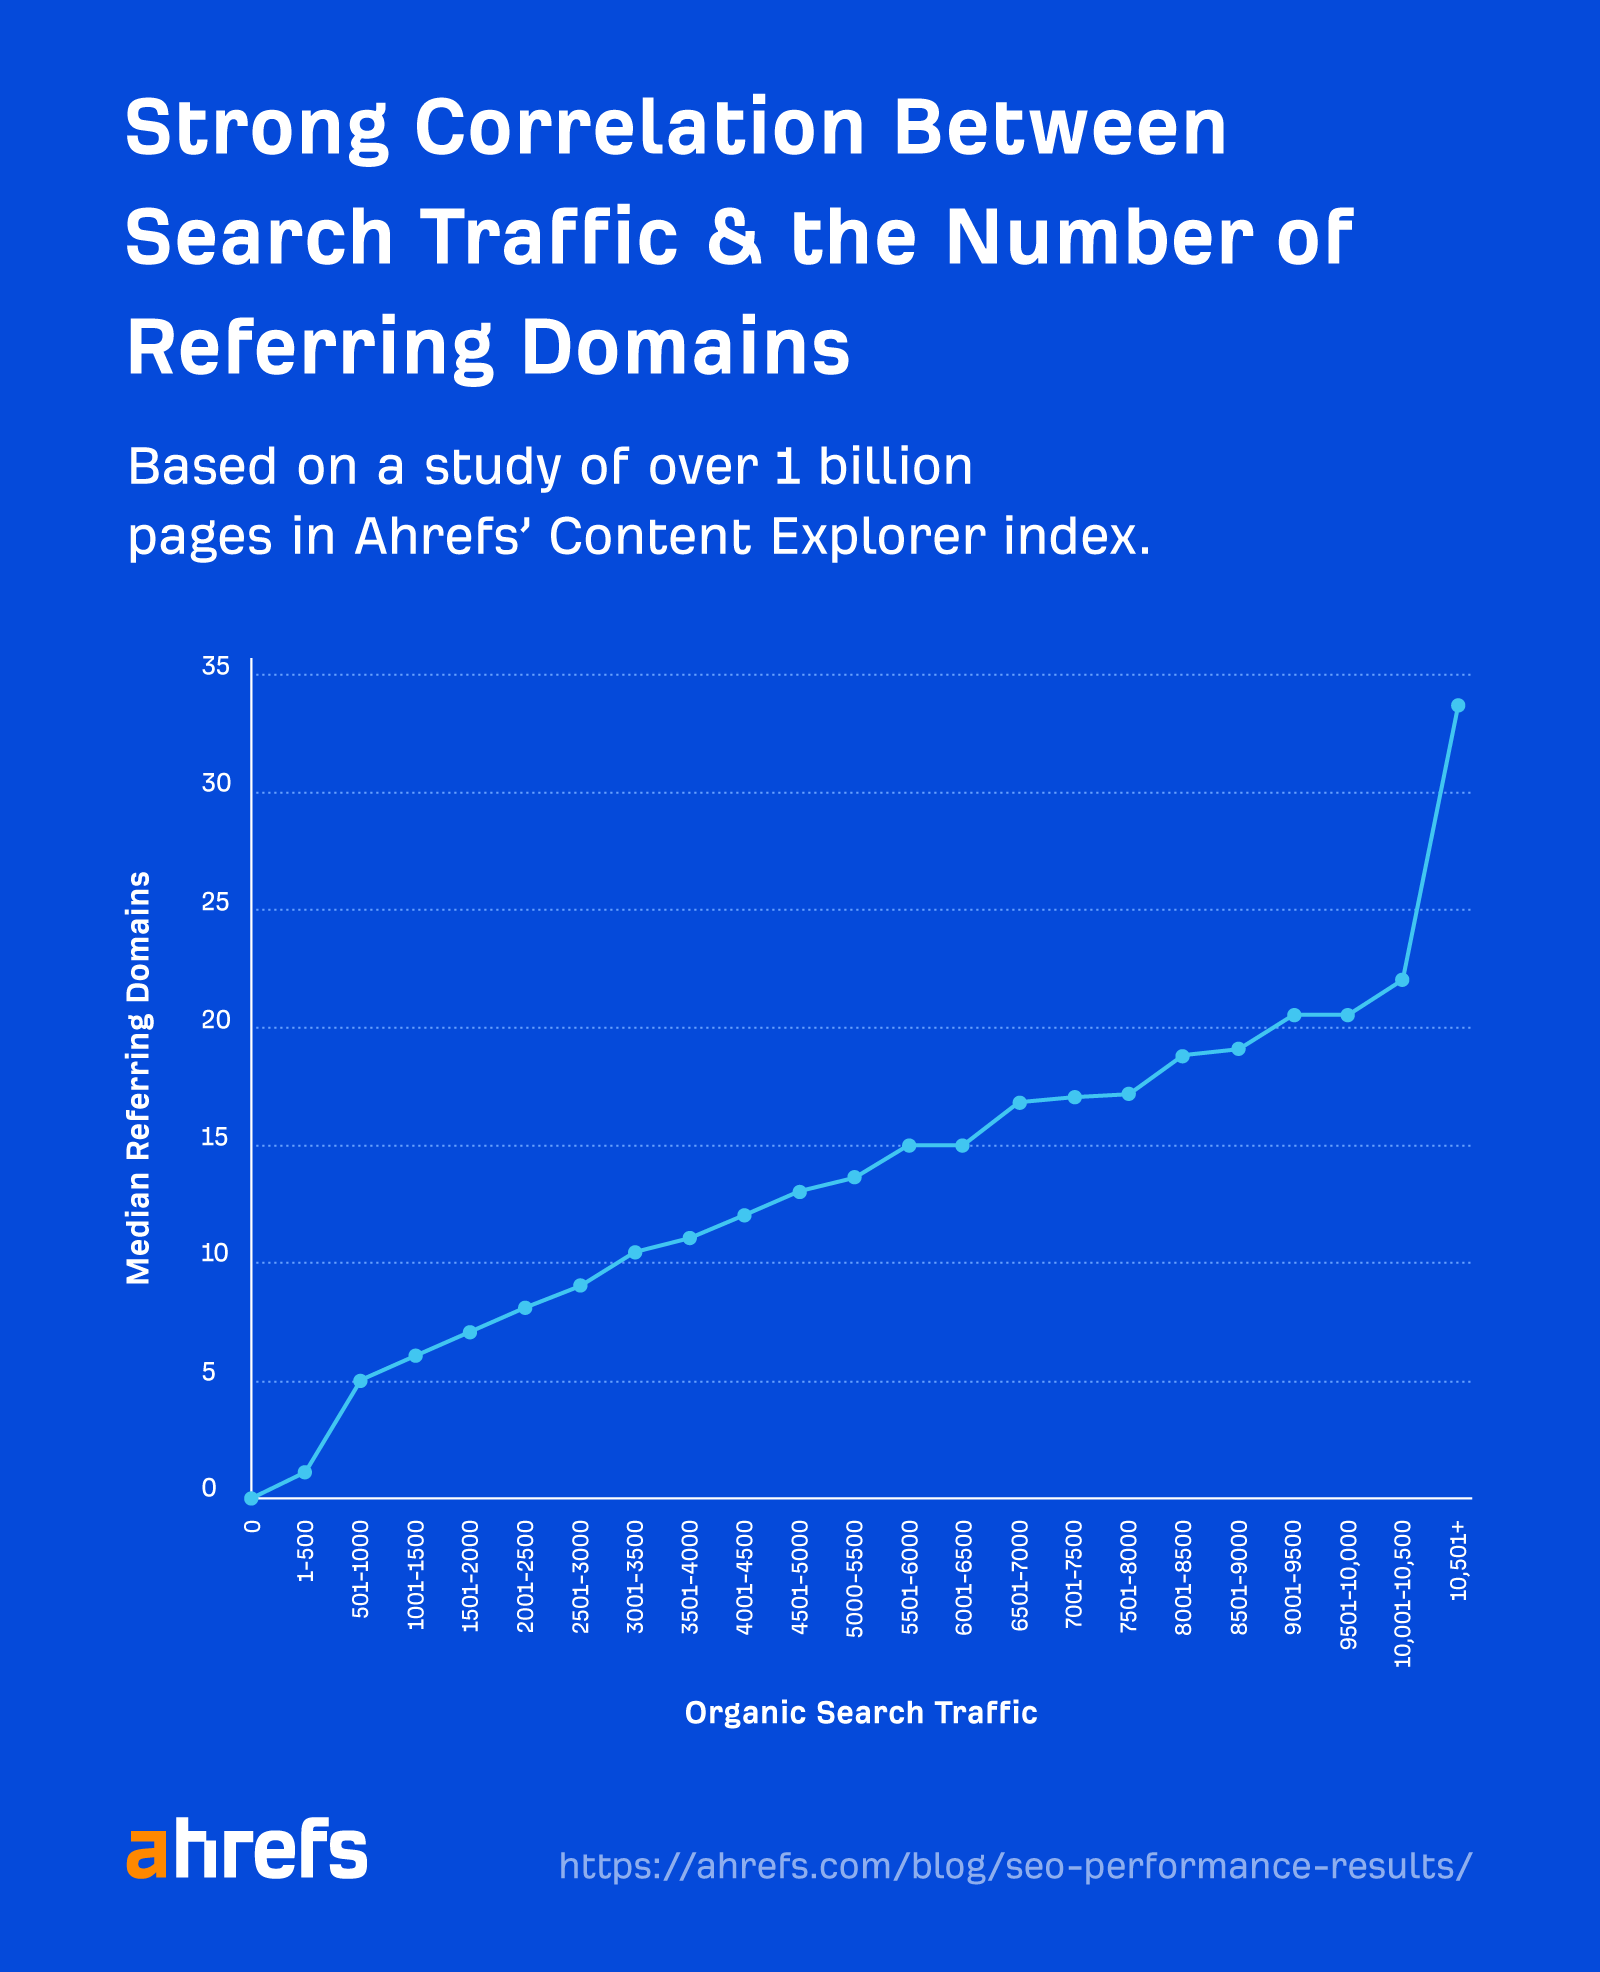 Strong correlation between referring domains and search traffic